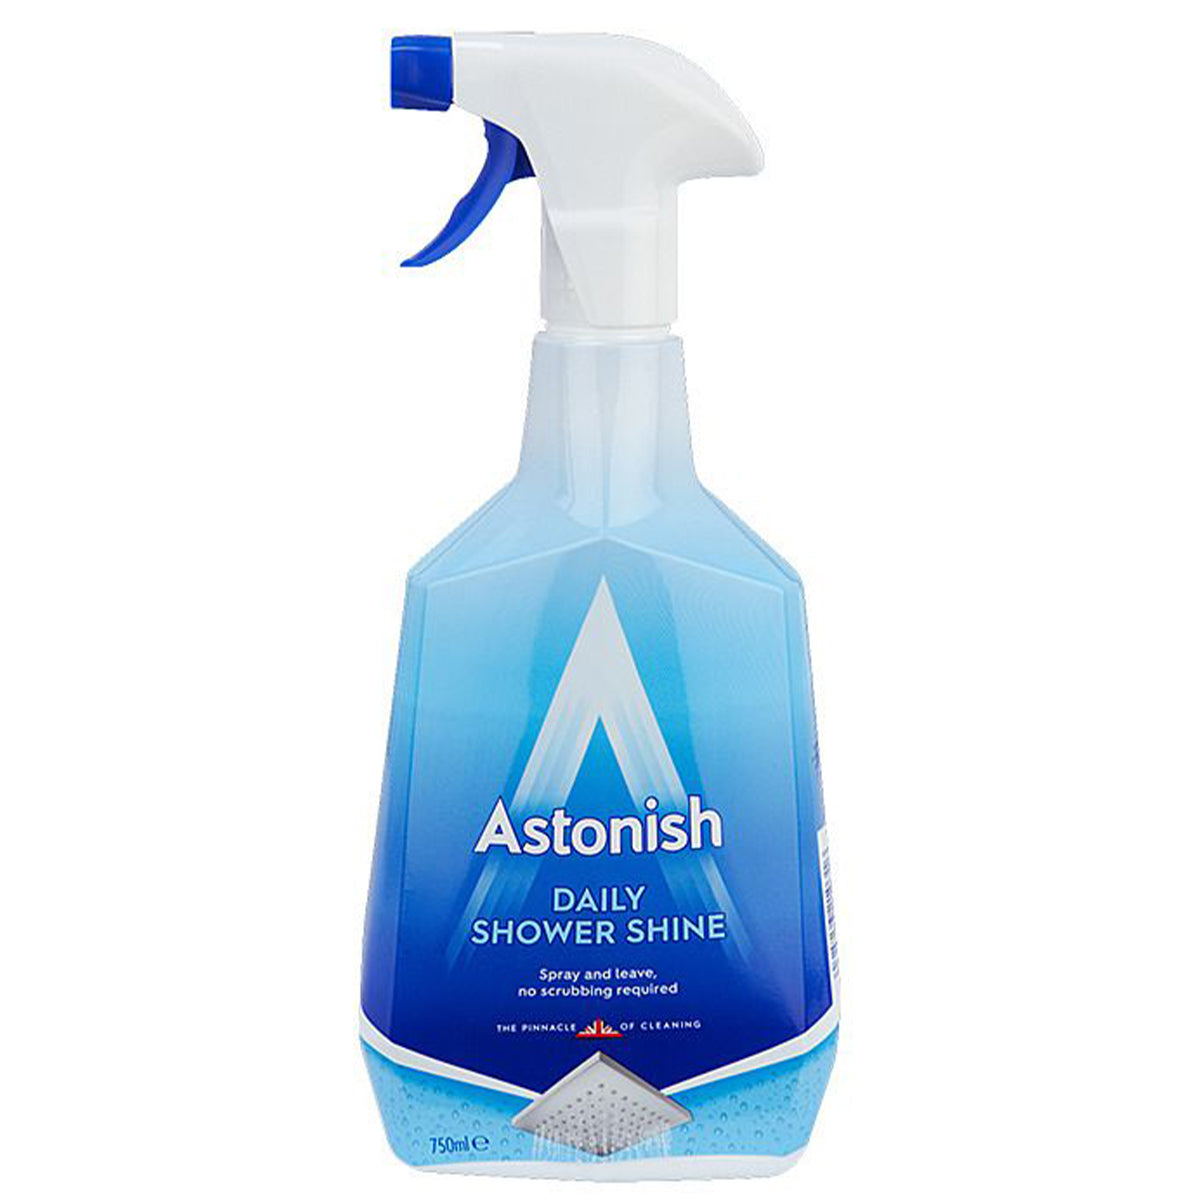 A bottle of Astonish Daily Shower Shine Cleaner - 750ml on a white background.